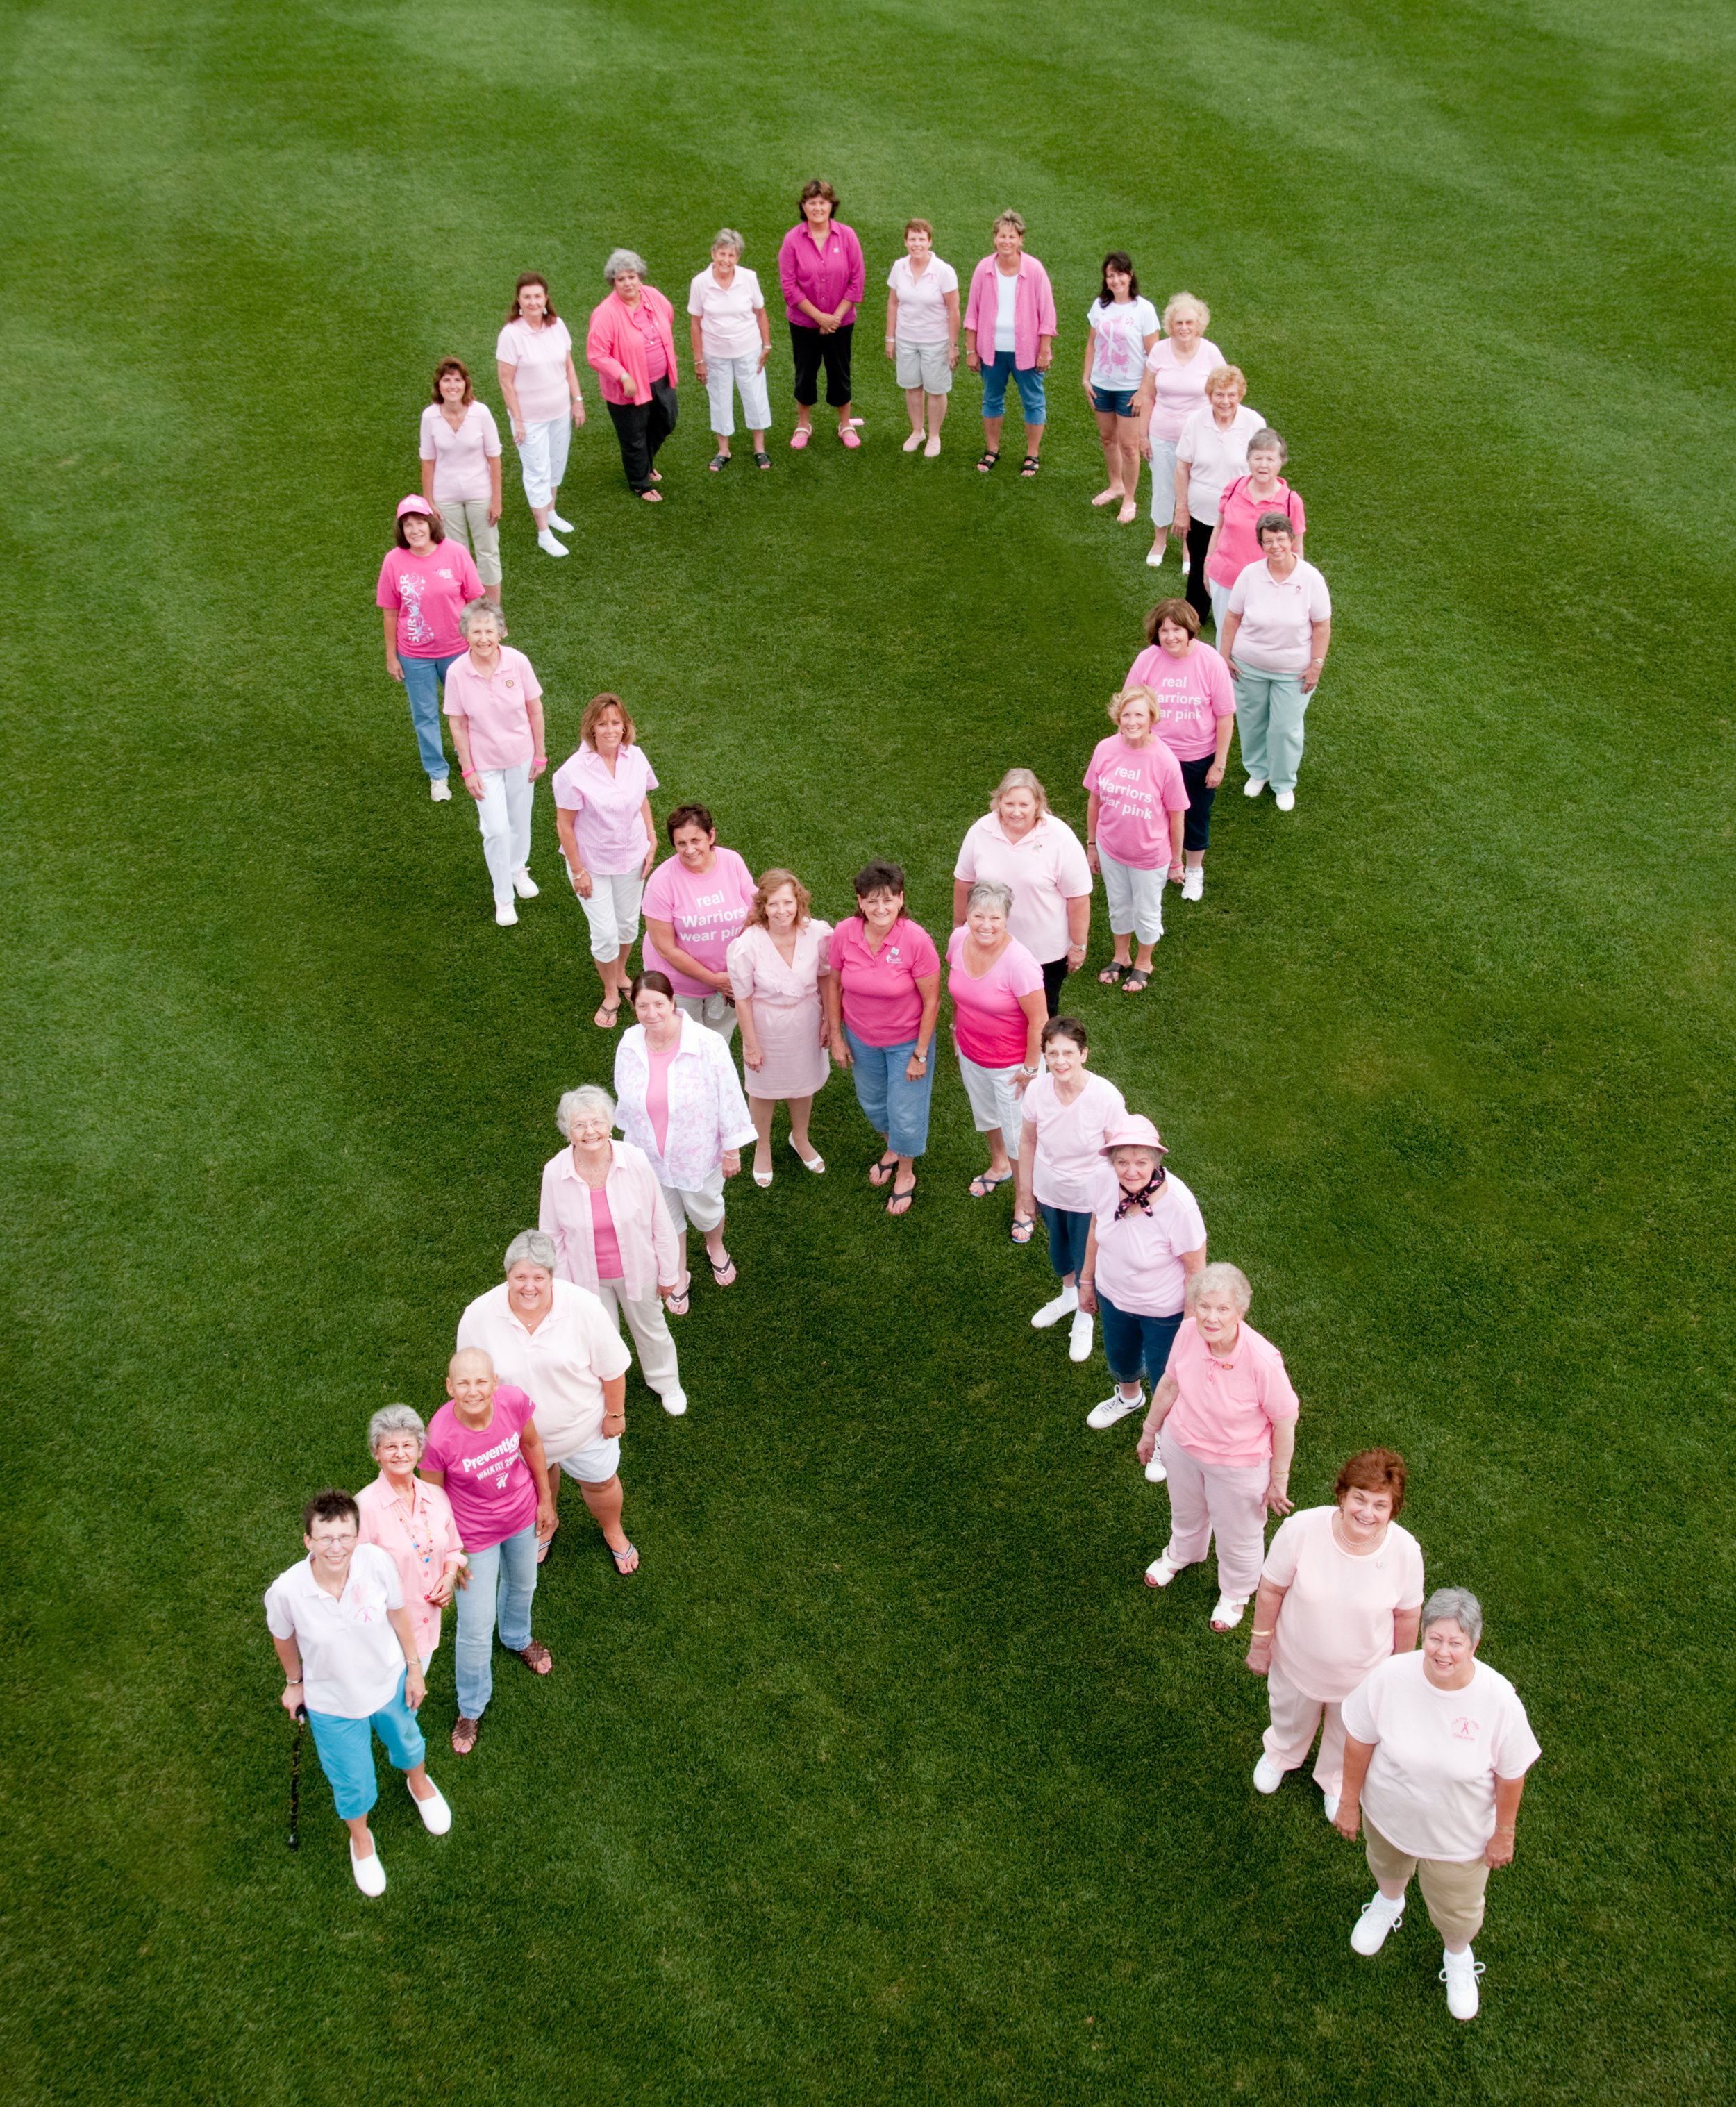 Breast Cancer Cover Photo